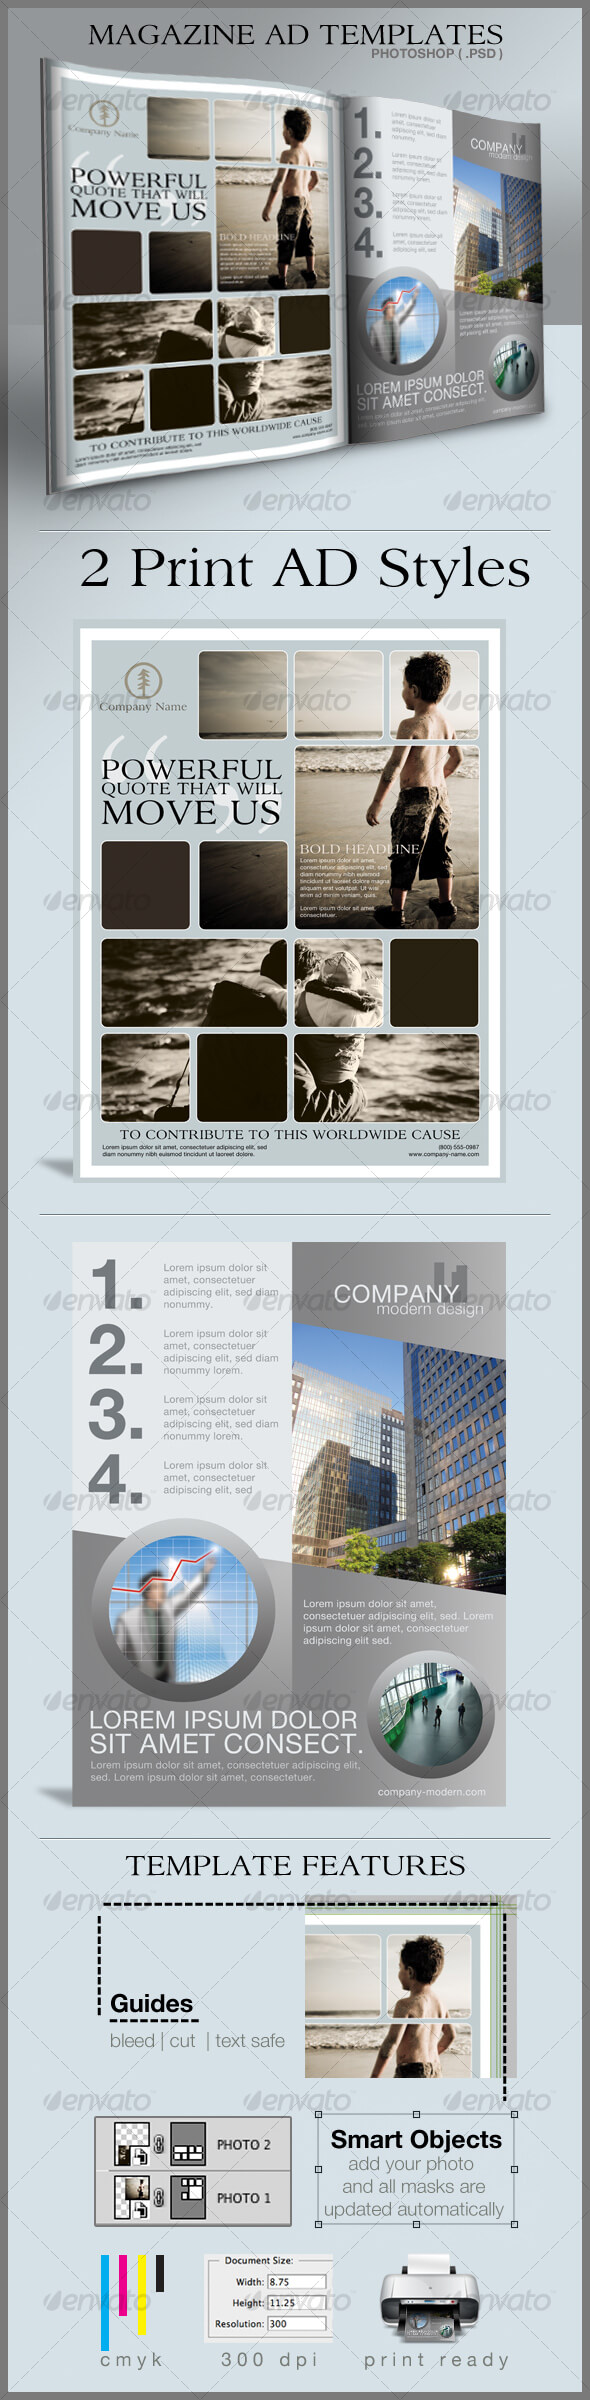 Print Ad Template Graphics, Designs & Templates Pertaining To Magazine Ad Template Word